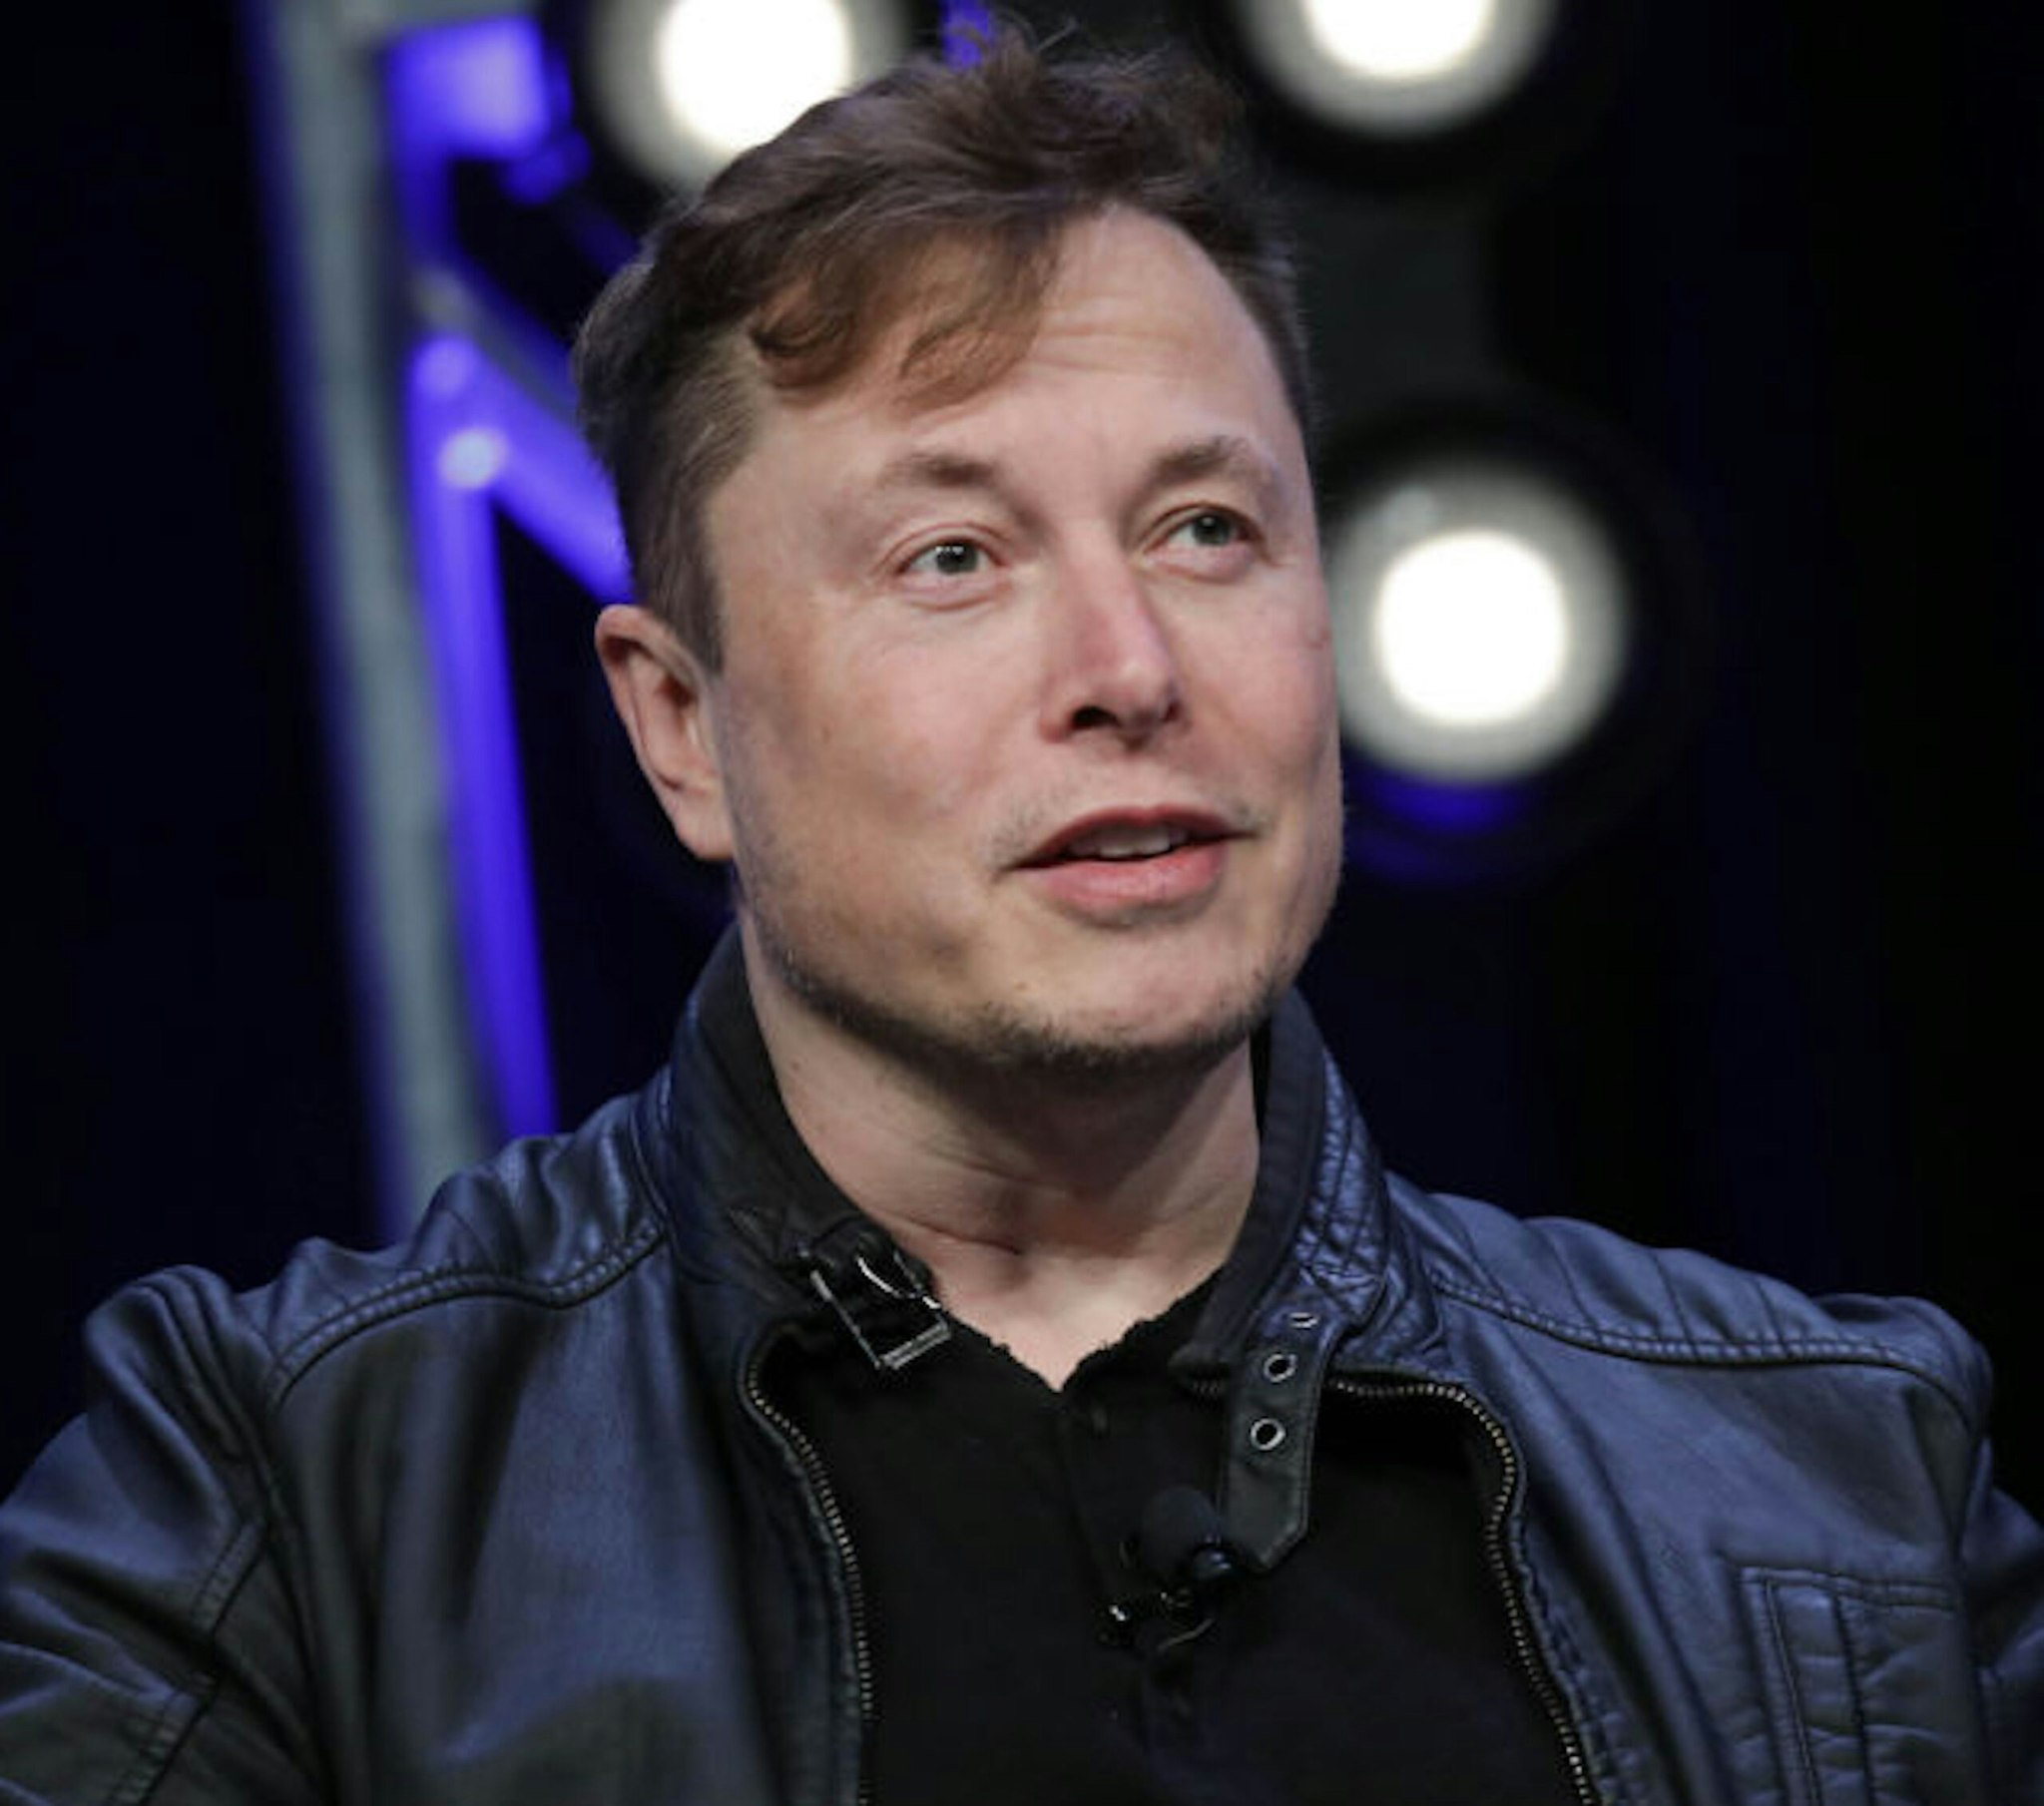 WASHINGTON DC, USA - MARCH 9: Elon Musk, Founder and Chief Engineer of SpaceX, speaks during the Satellite 2020 Conference in Washington, DC, United States on March 9, 2020.